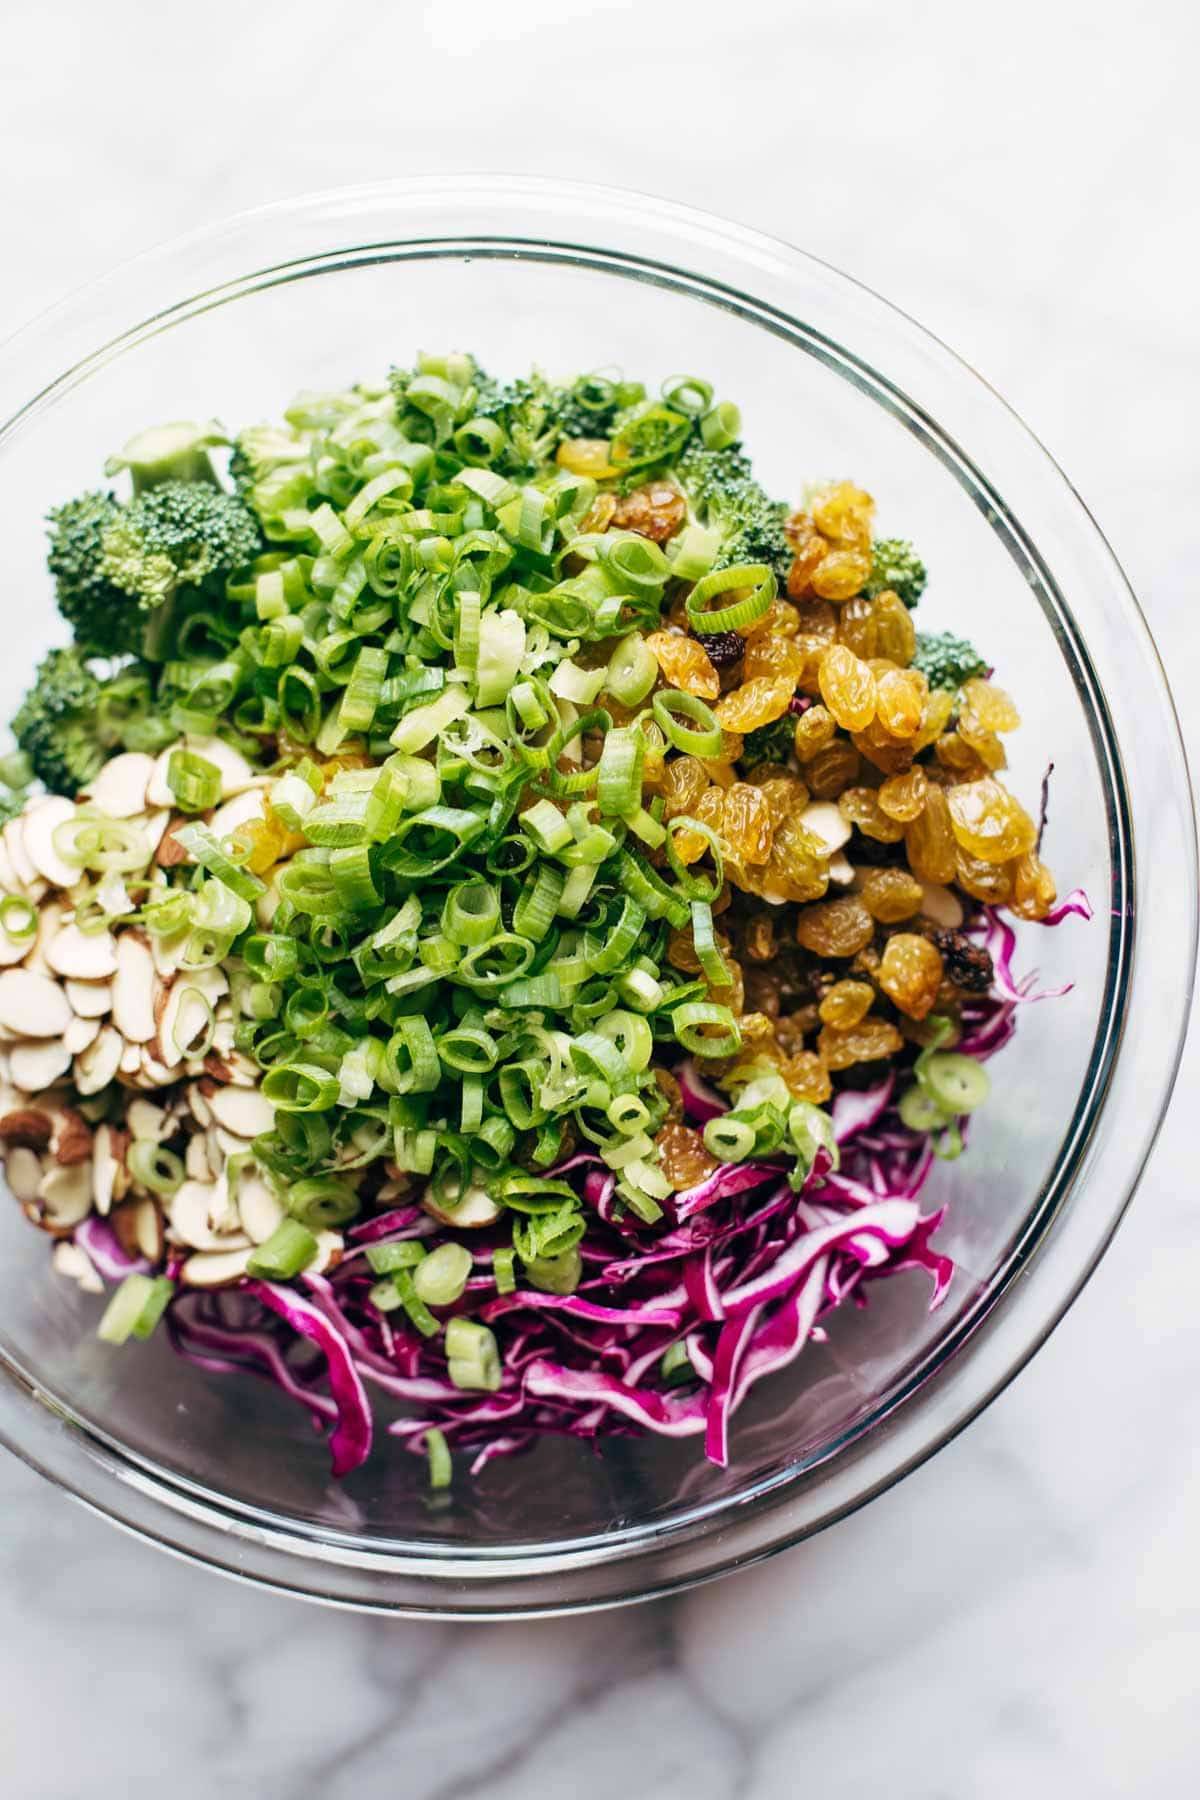 Broccoli salad ingredients in a bowl.